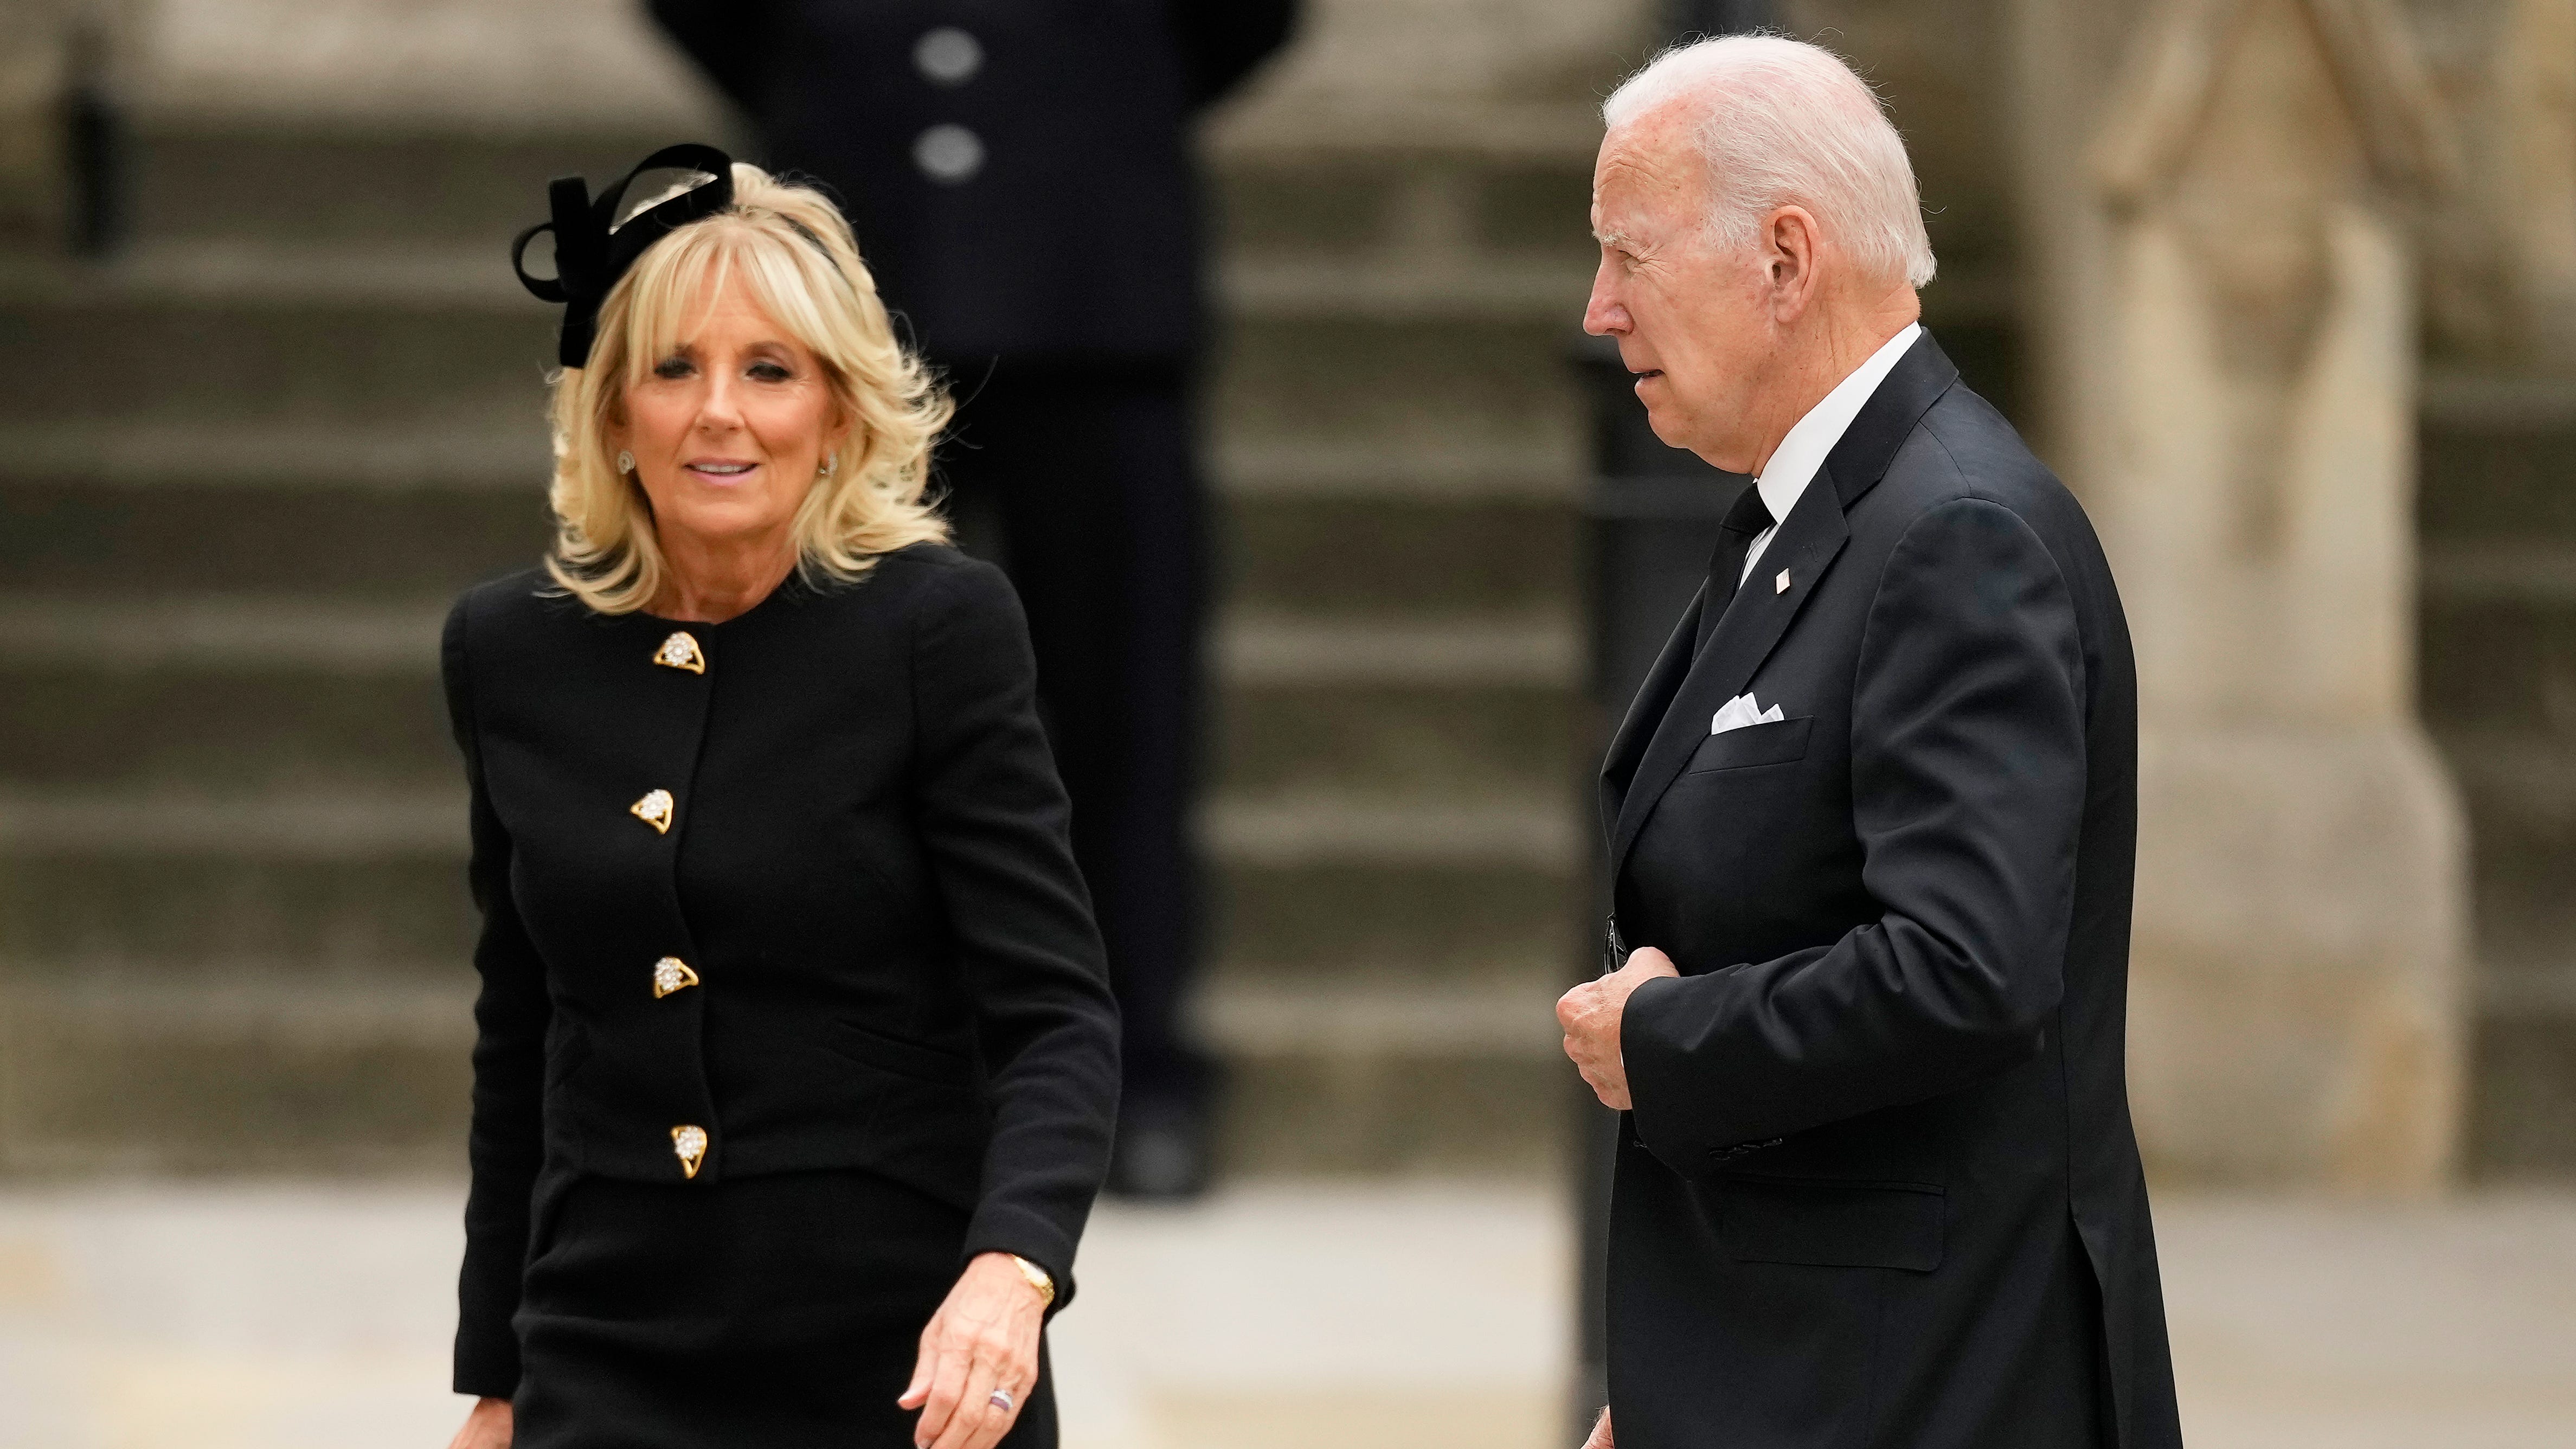 President Joe Biden and First Lady Jill Biden arrive ahead of the State Funeral of Queen Elizabeth II at Westminster Abbey on Sept. 19, 2022 in London.